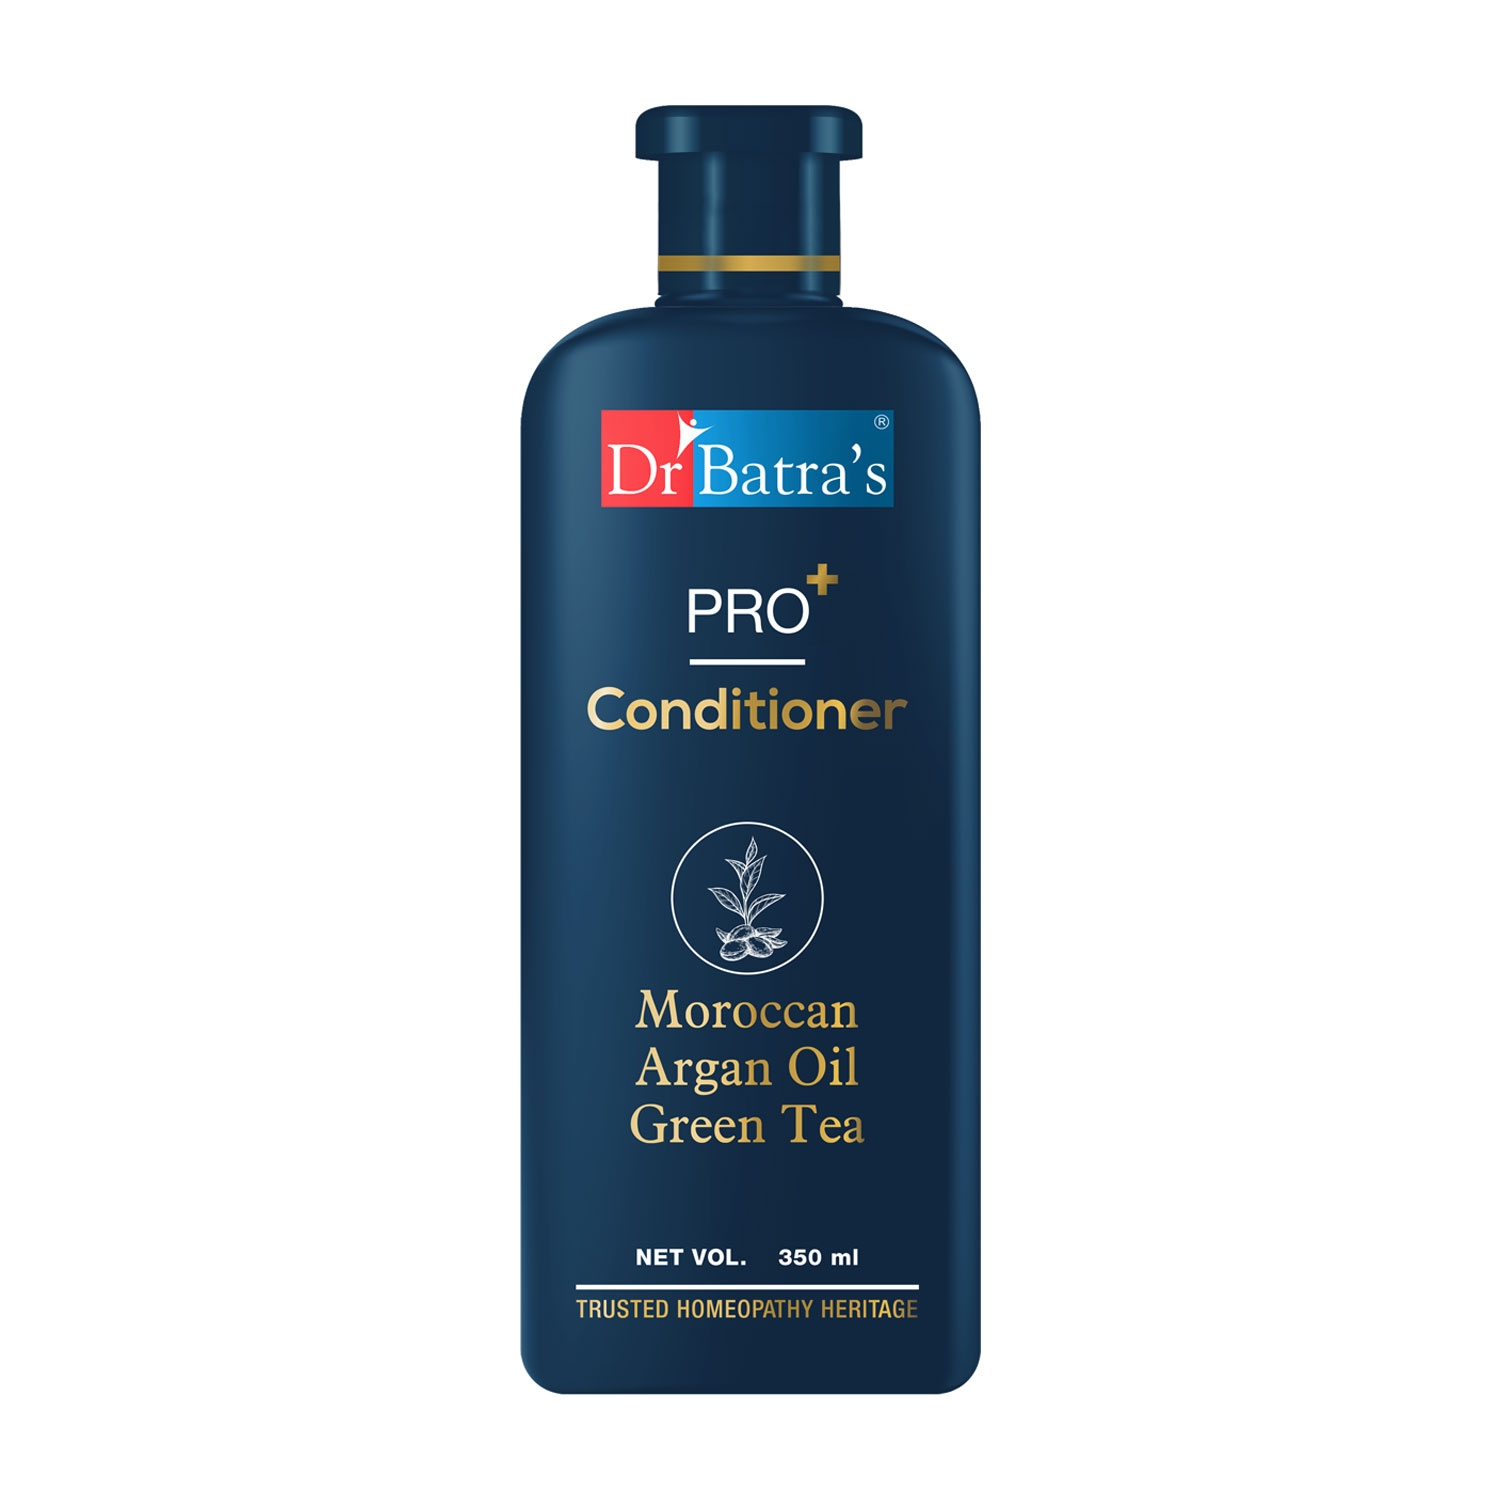 Dr Batra’s® PRO+ Conditioner. Contains Moroccan Argan Oil, Green Tea, Castor Oil, Horsetail plant, Thuja Extracts. Sulphate, Paraben, Silicone Free. Suitable for men and women. 350 ml